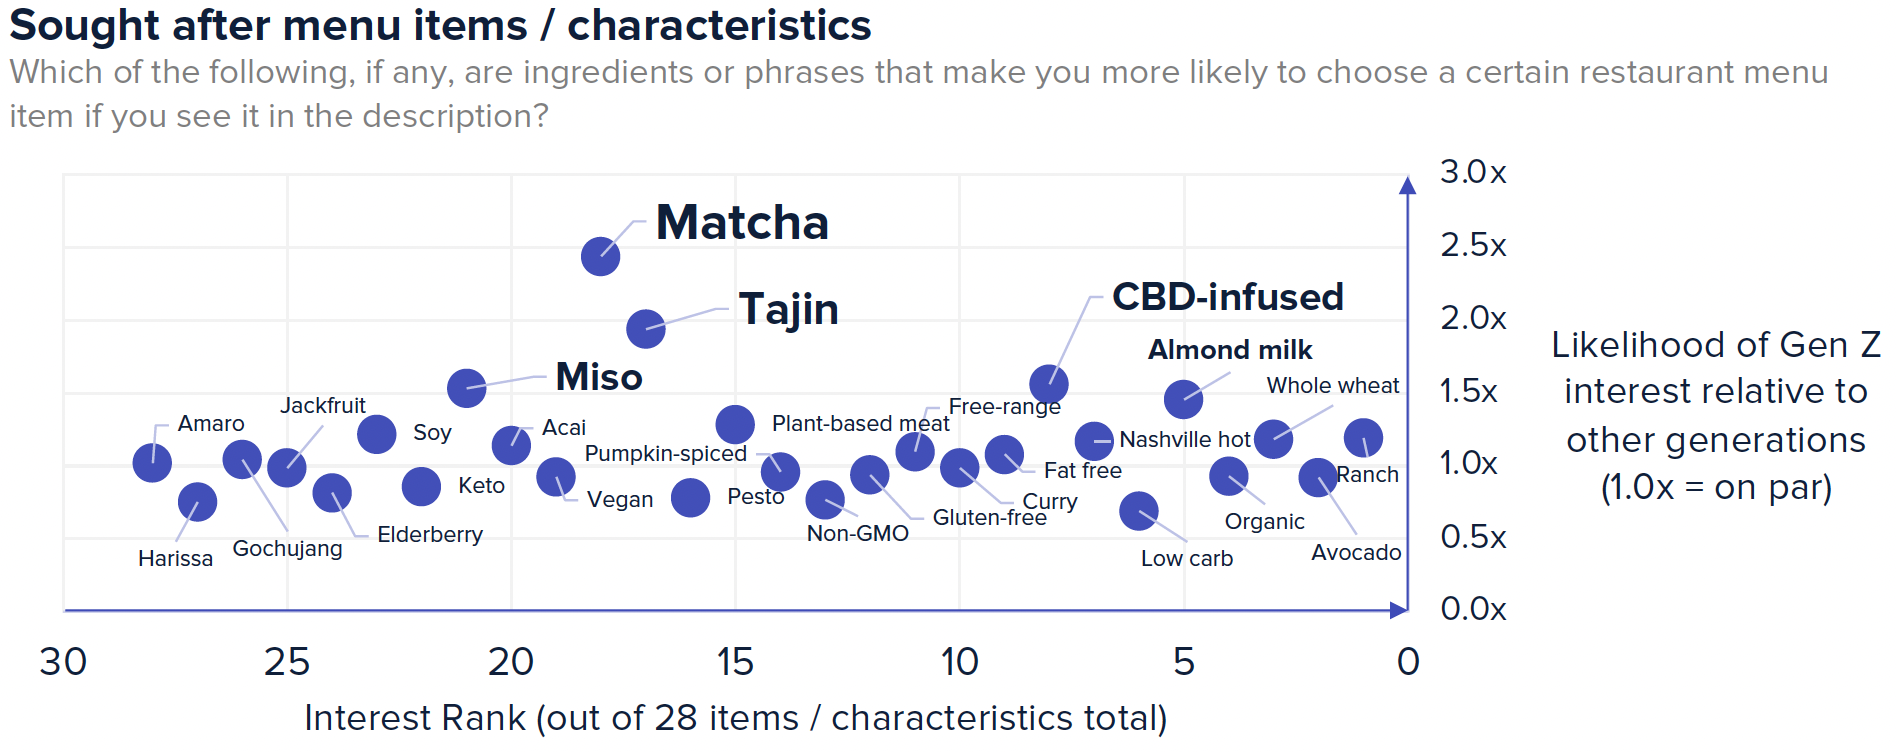 Gen Z is more likely to prefer matcha, tan, miso, CBD-infused food, and Almond milk compared to other generations.